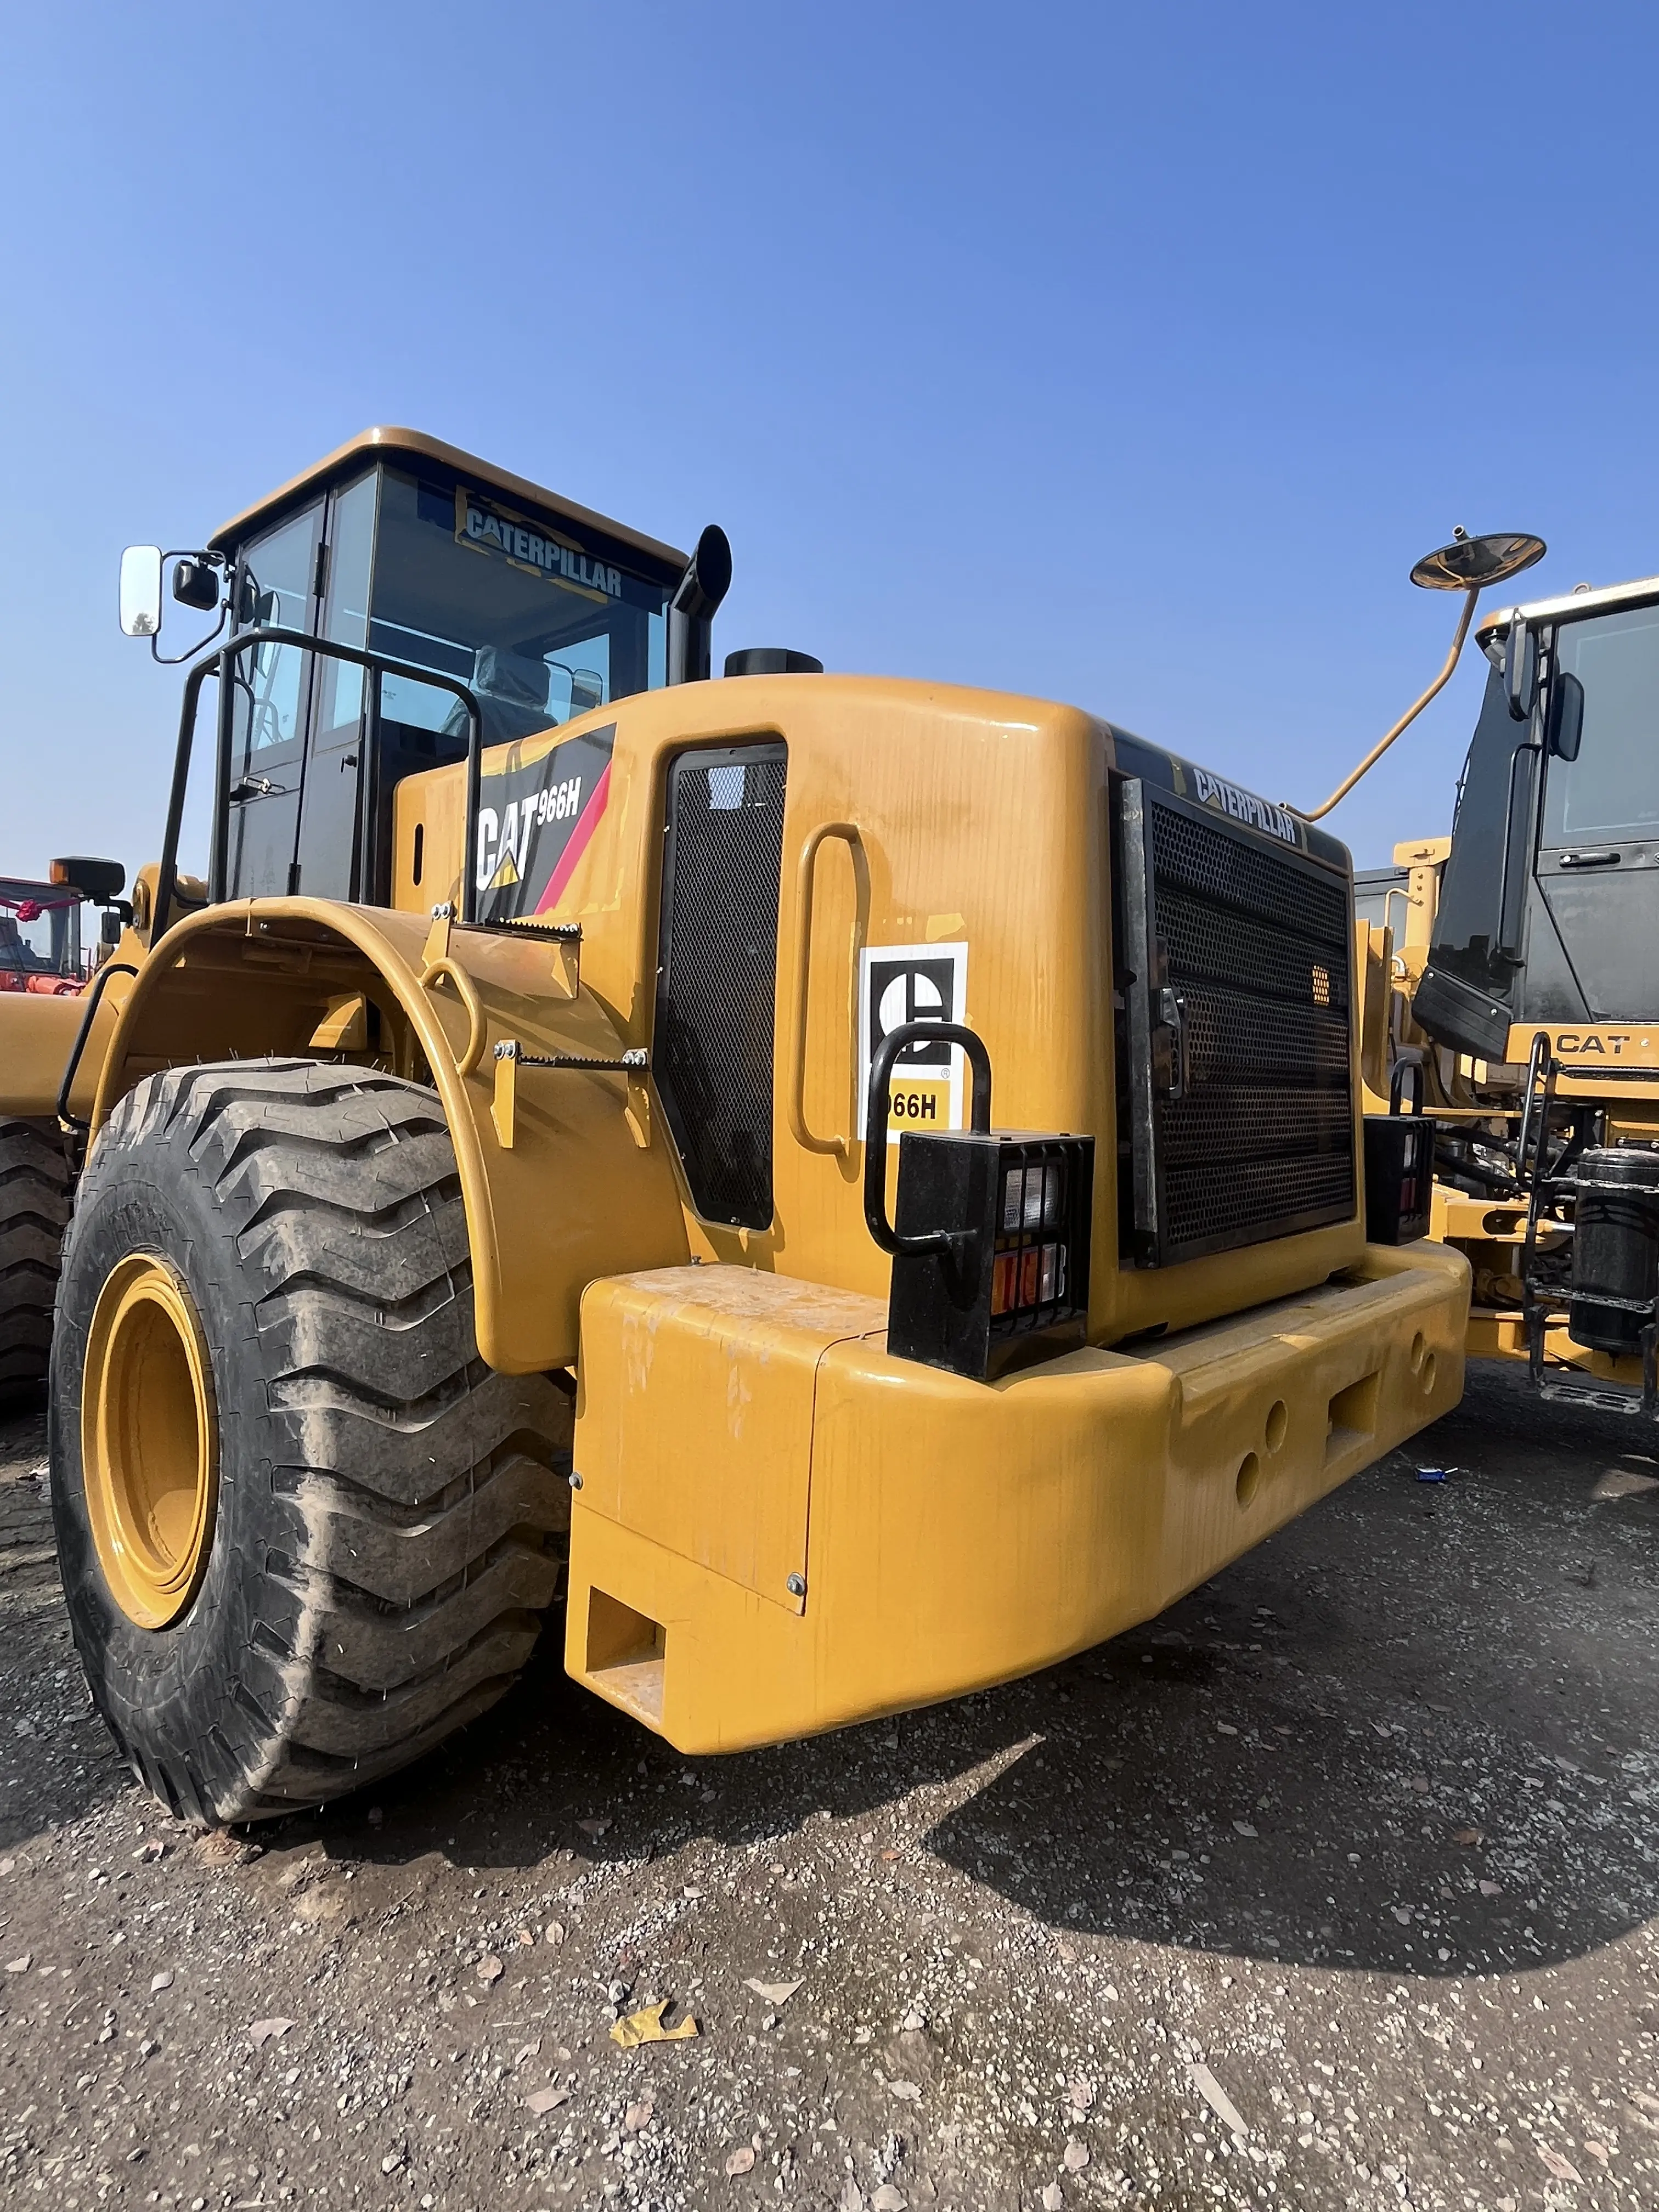 Caterpillar quality CAT966H with original parts CAT 966H used large wheel skid steer loaders second-hand construction machinery